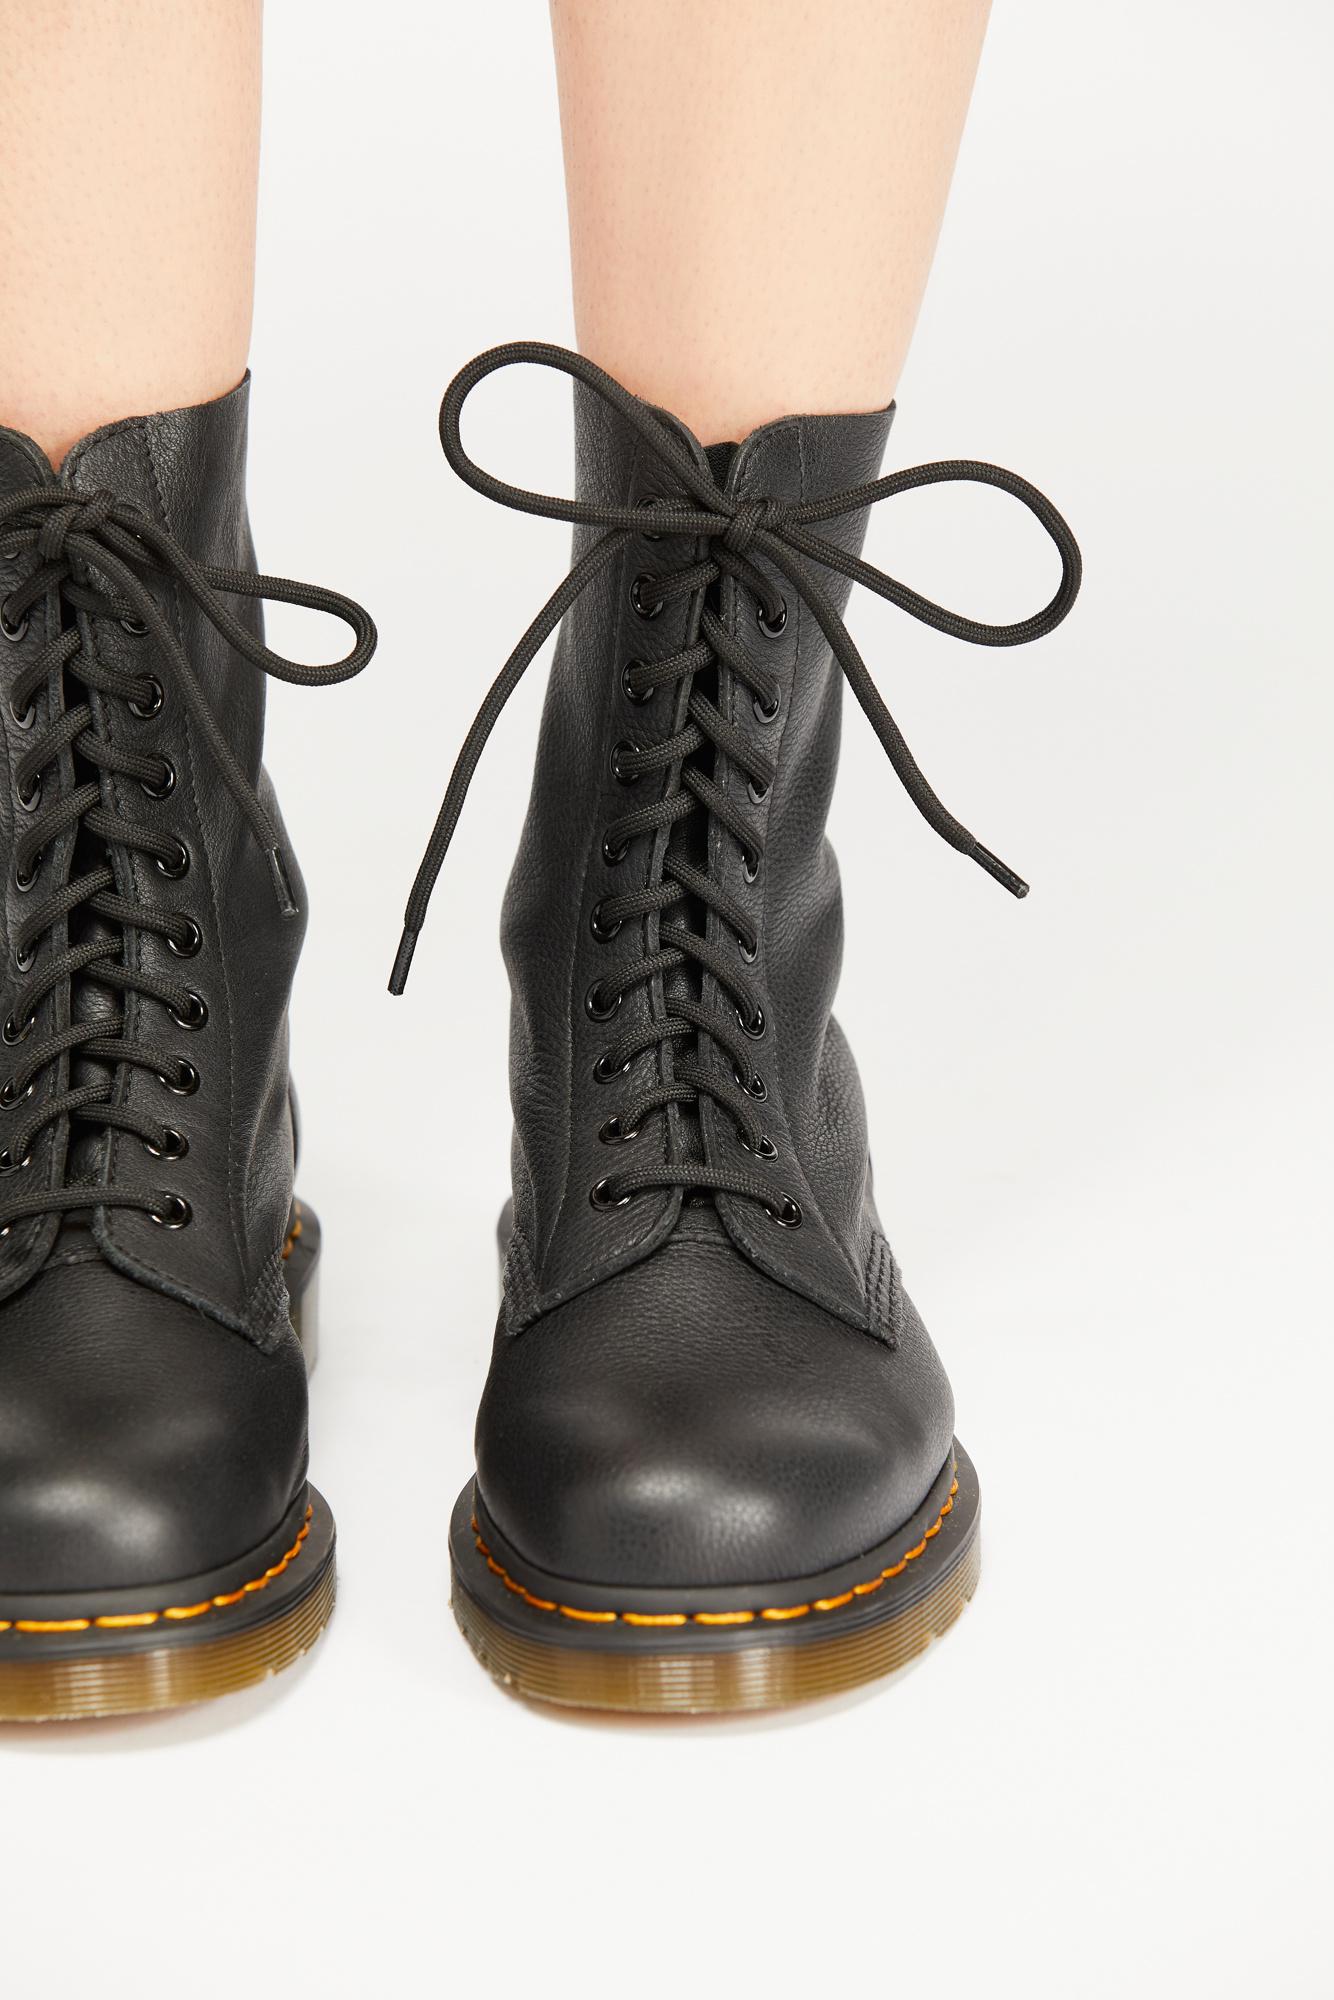 Free People Leather Dr. Martens 1490 10 Eye Lace-up Boot in Black - Lyst